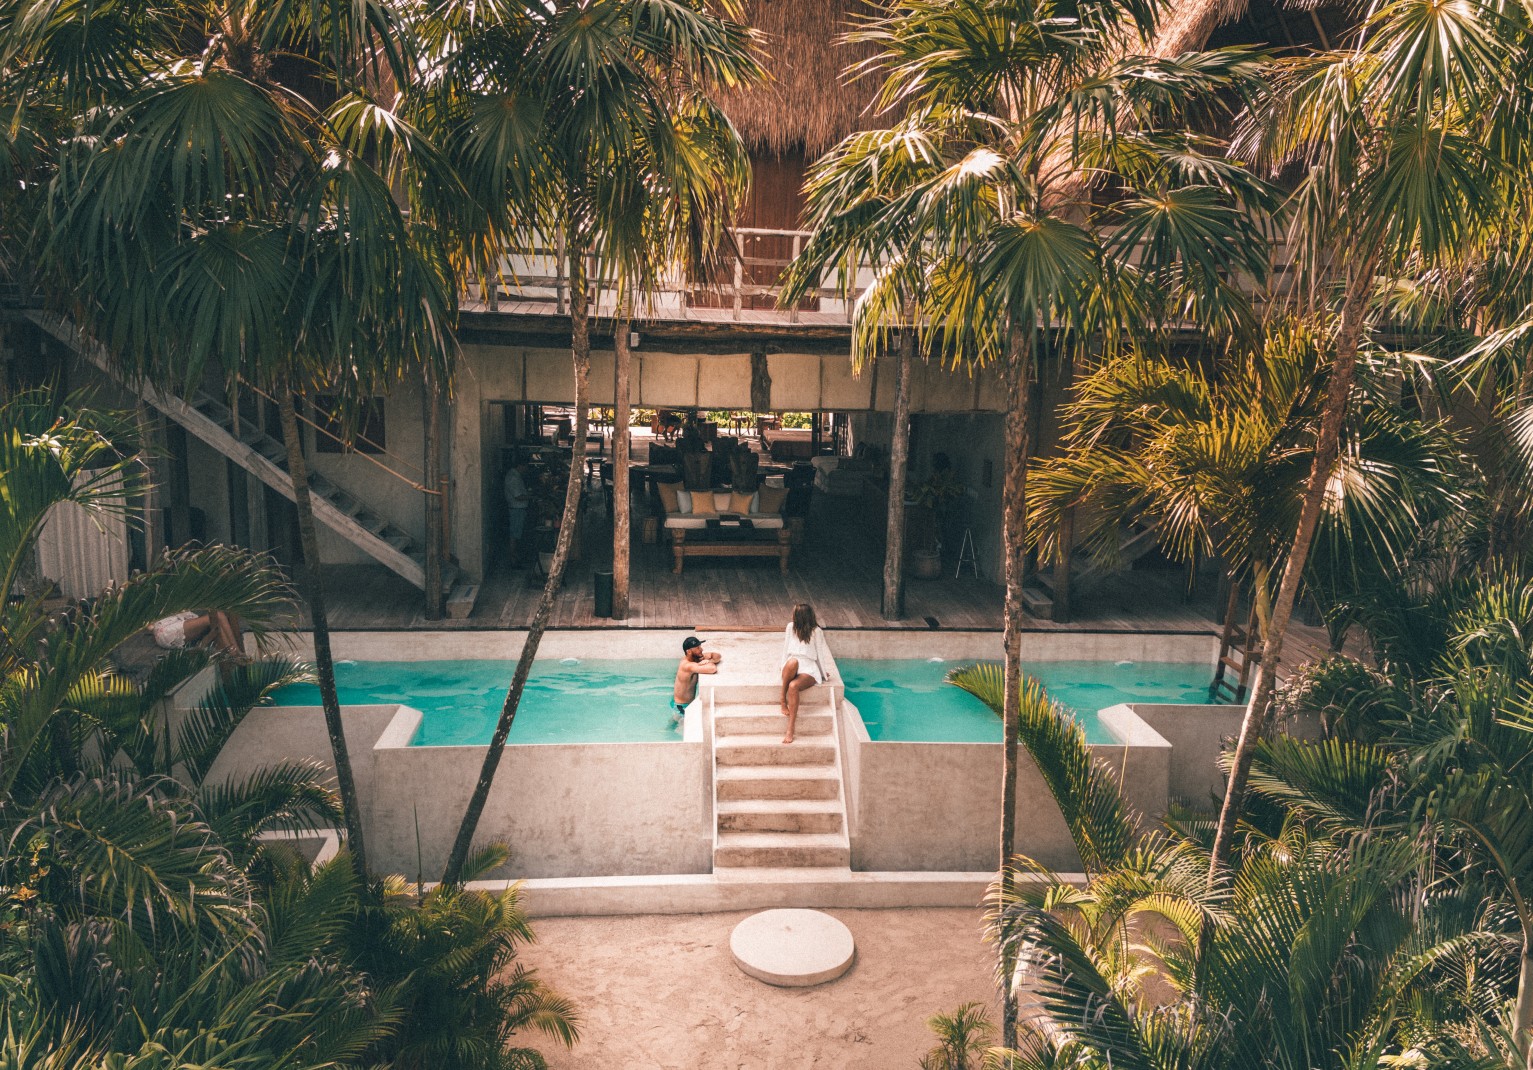 Hotel pool in Tulum, Mexico surrounded by palm trees